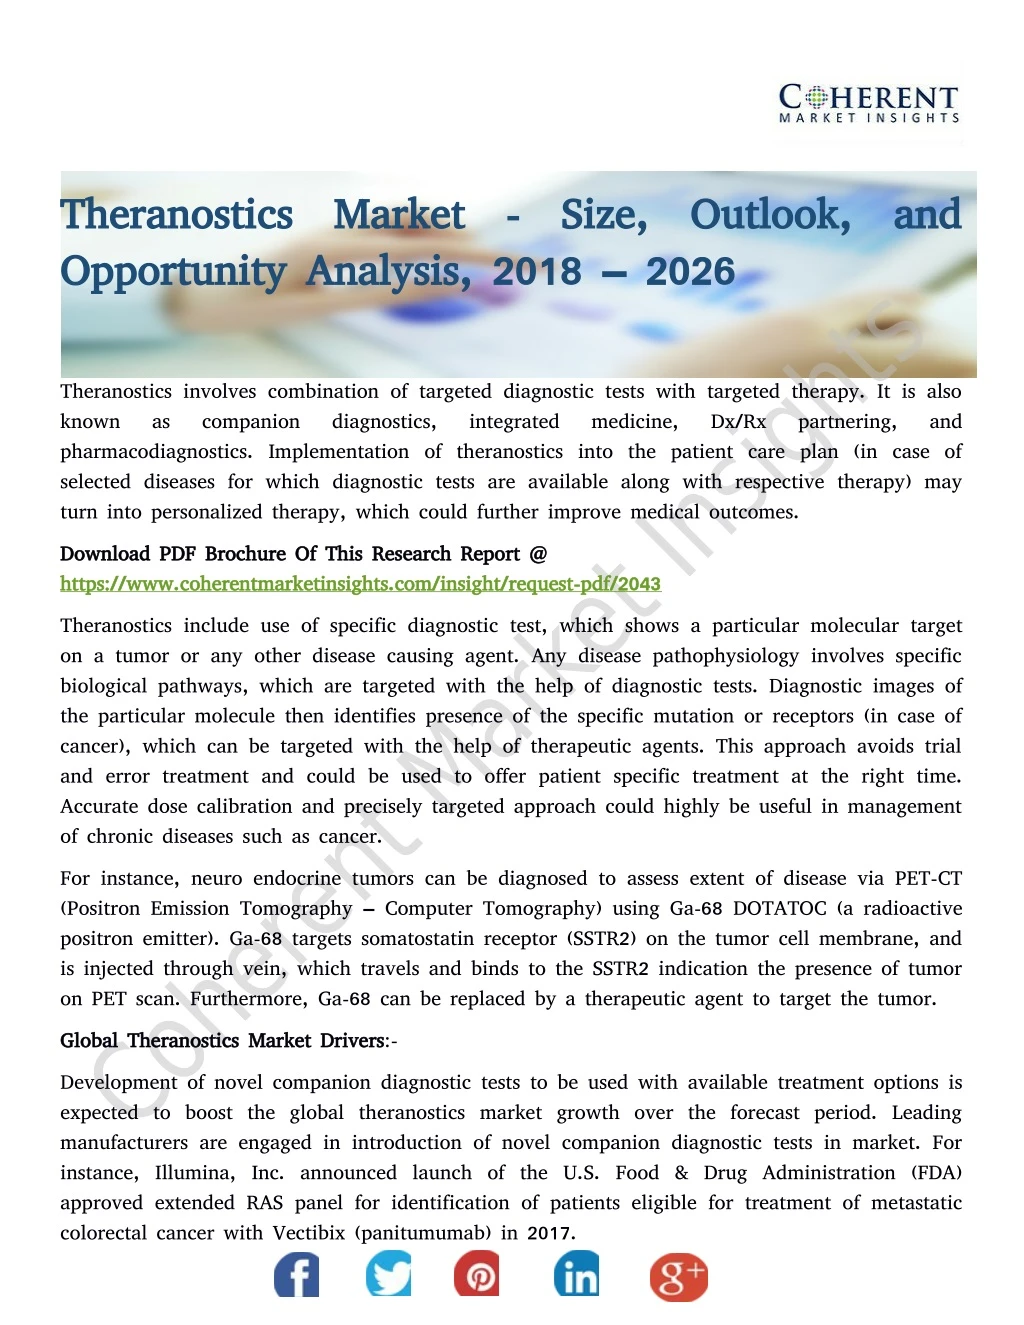 theranostics market size outlook and theranostics